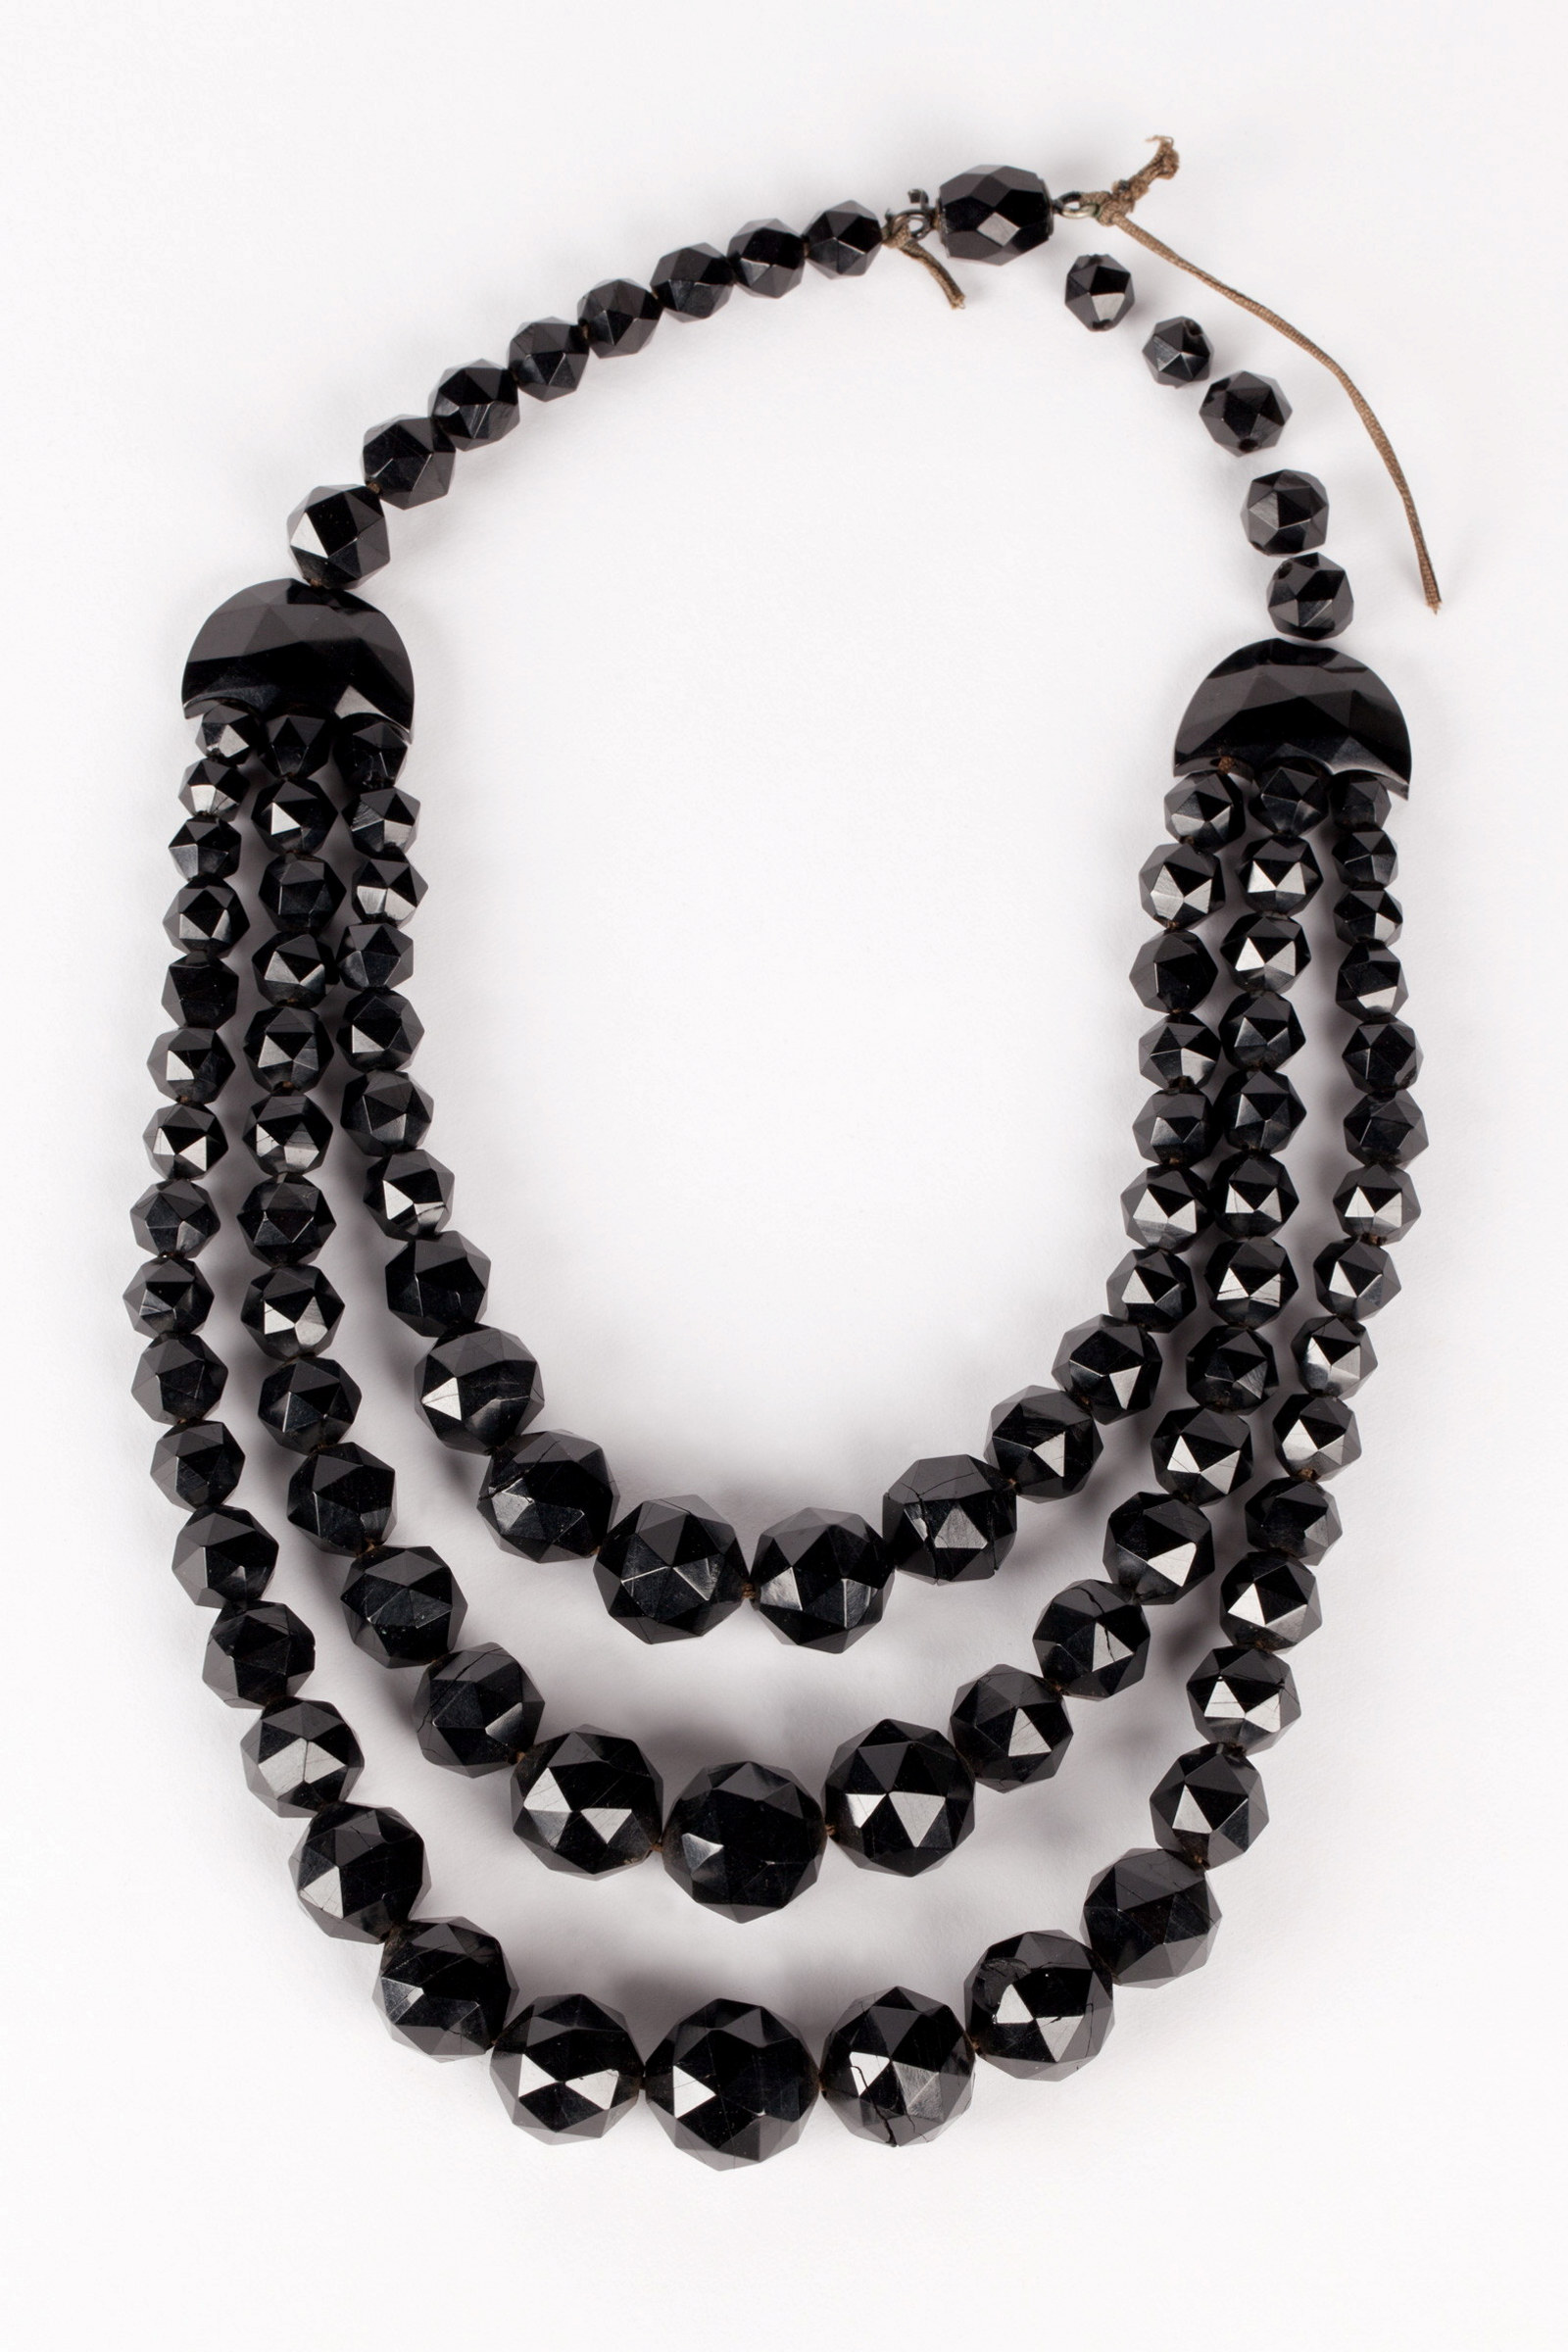 Jet necklace, a single strand of faceted beads from which hang three strands of graduated beads, 1880-1884